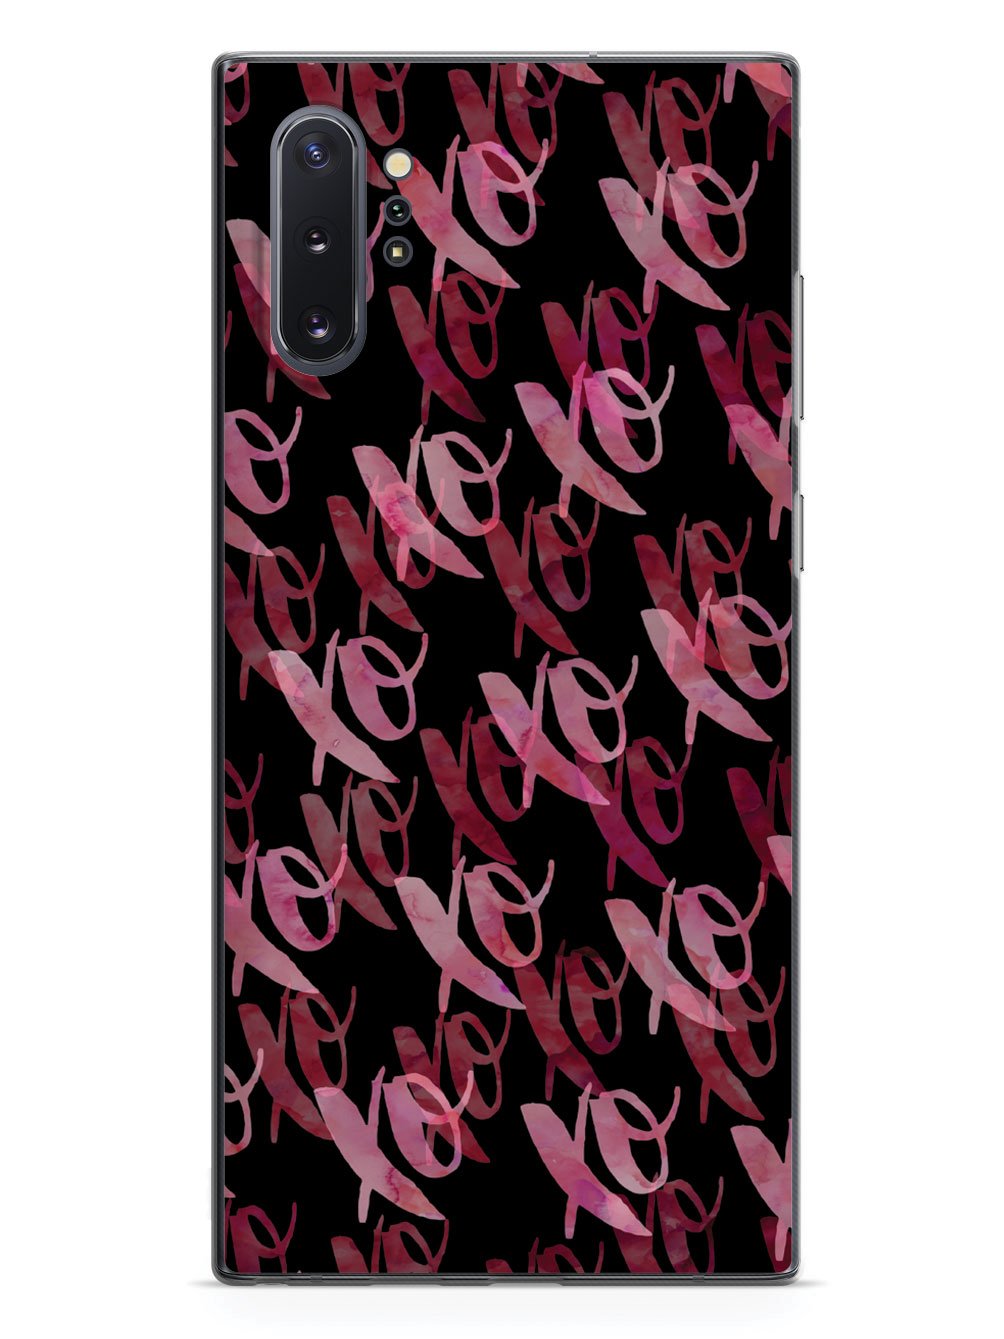 XOXO - Pink & Red Watercolor Case